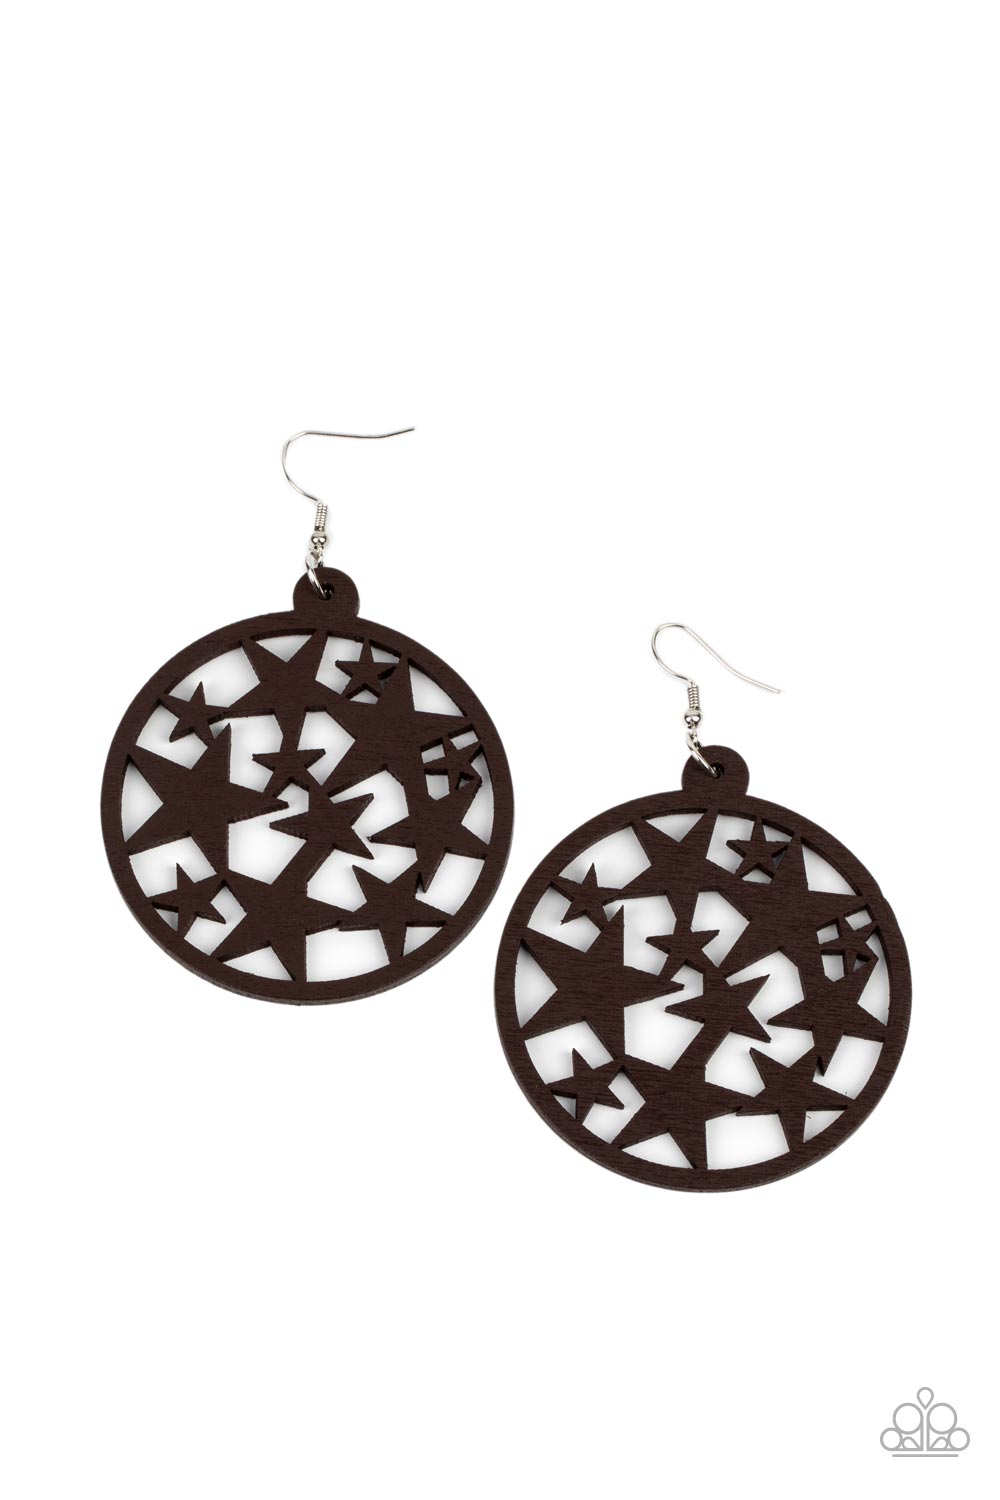 five-dollar-jewelry-cosmic-paradise-brown-earrings-paparazzi-accessories